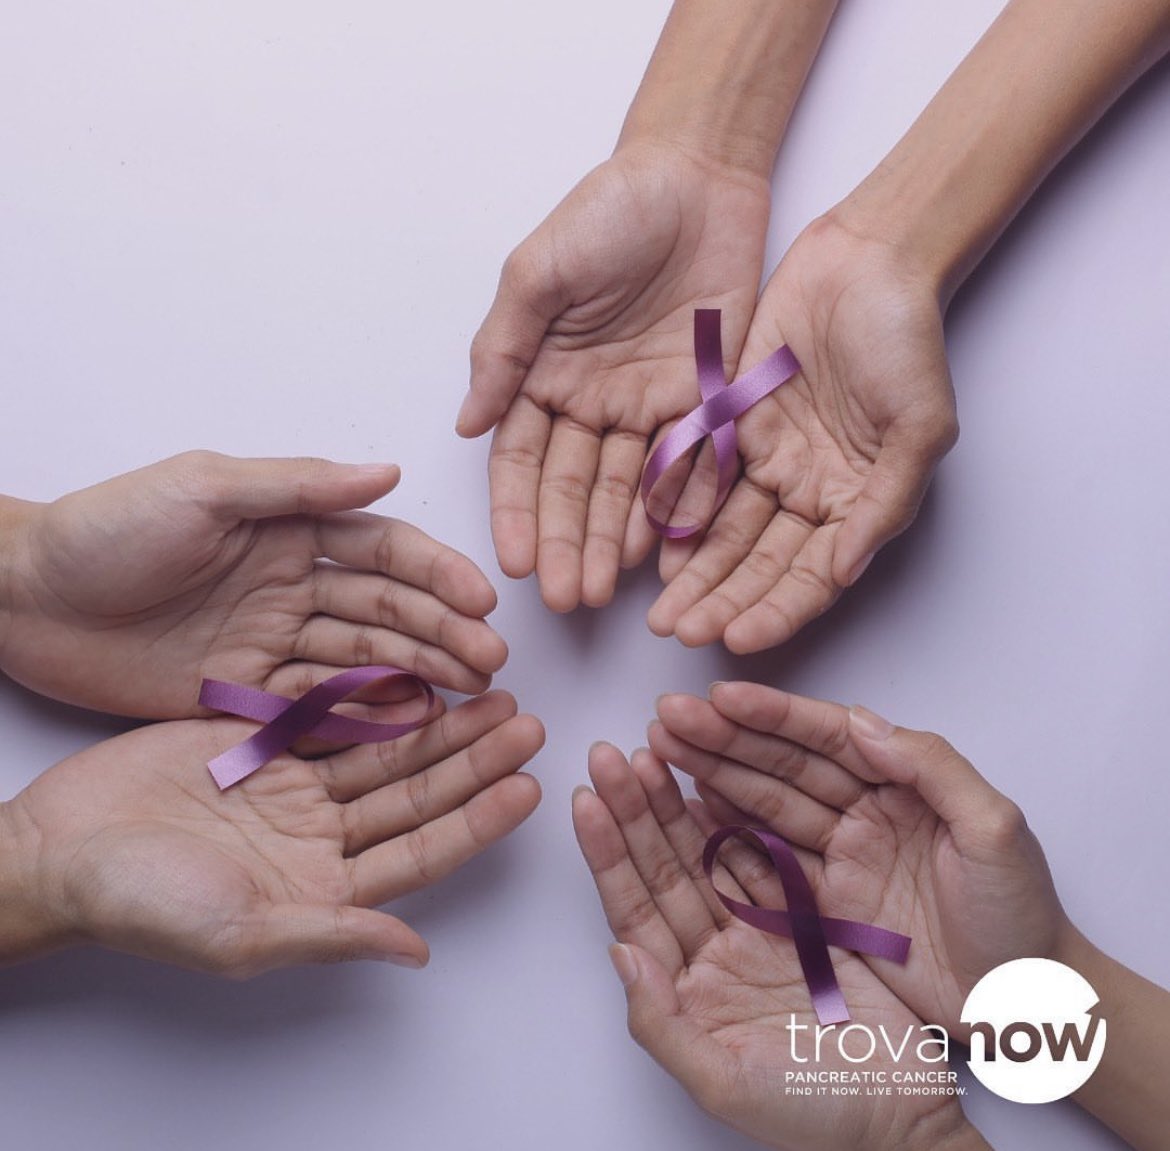 👨‍👩‍👧‍👦 Do you have any family history of pancreatic cancer? 

👉New research links specific genes and mutations to an increased likelihood of developing pancreatic cancer. 

🧬Learn more at trovanow.com #trovanow #precede #cancerawareness